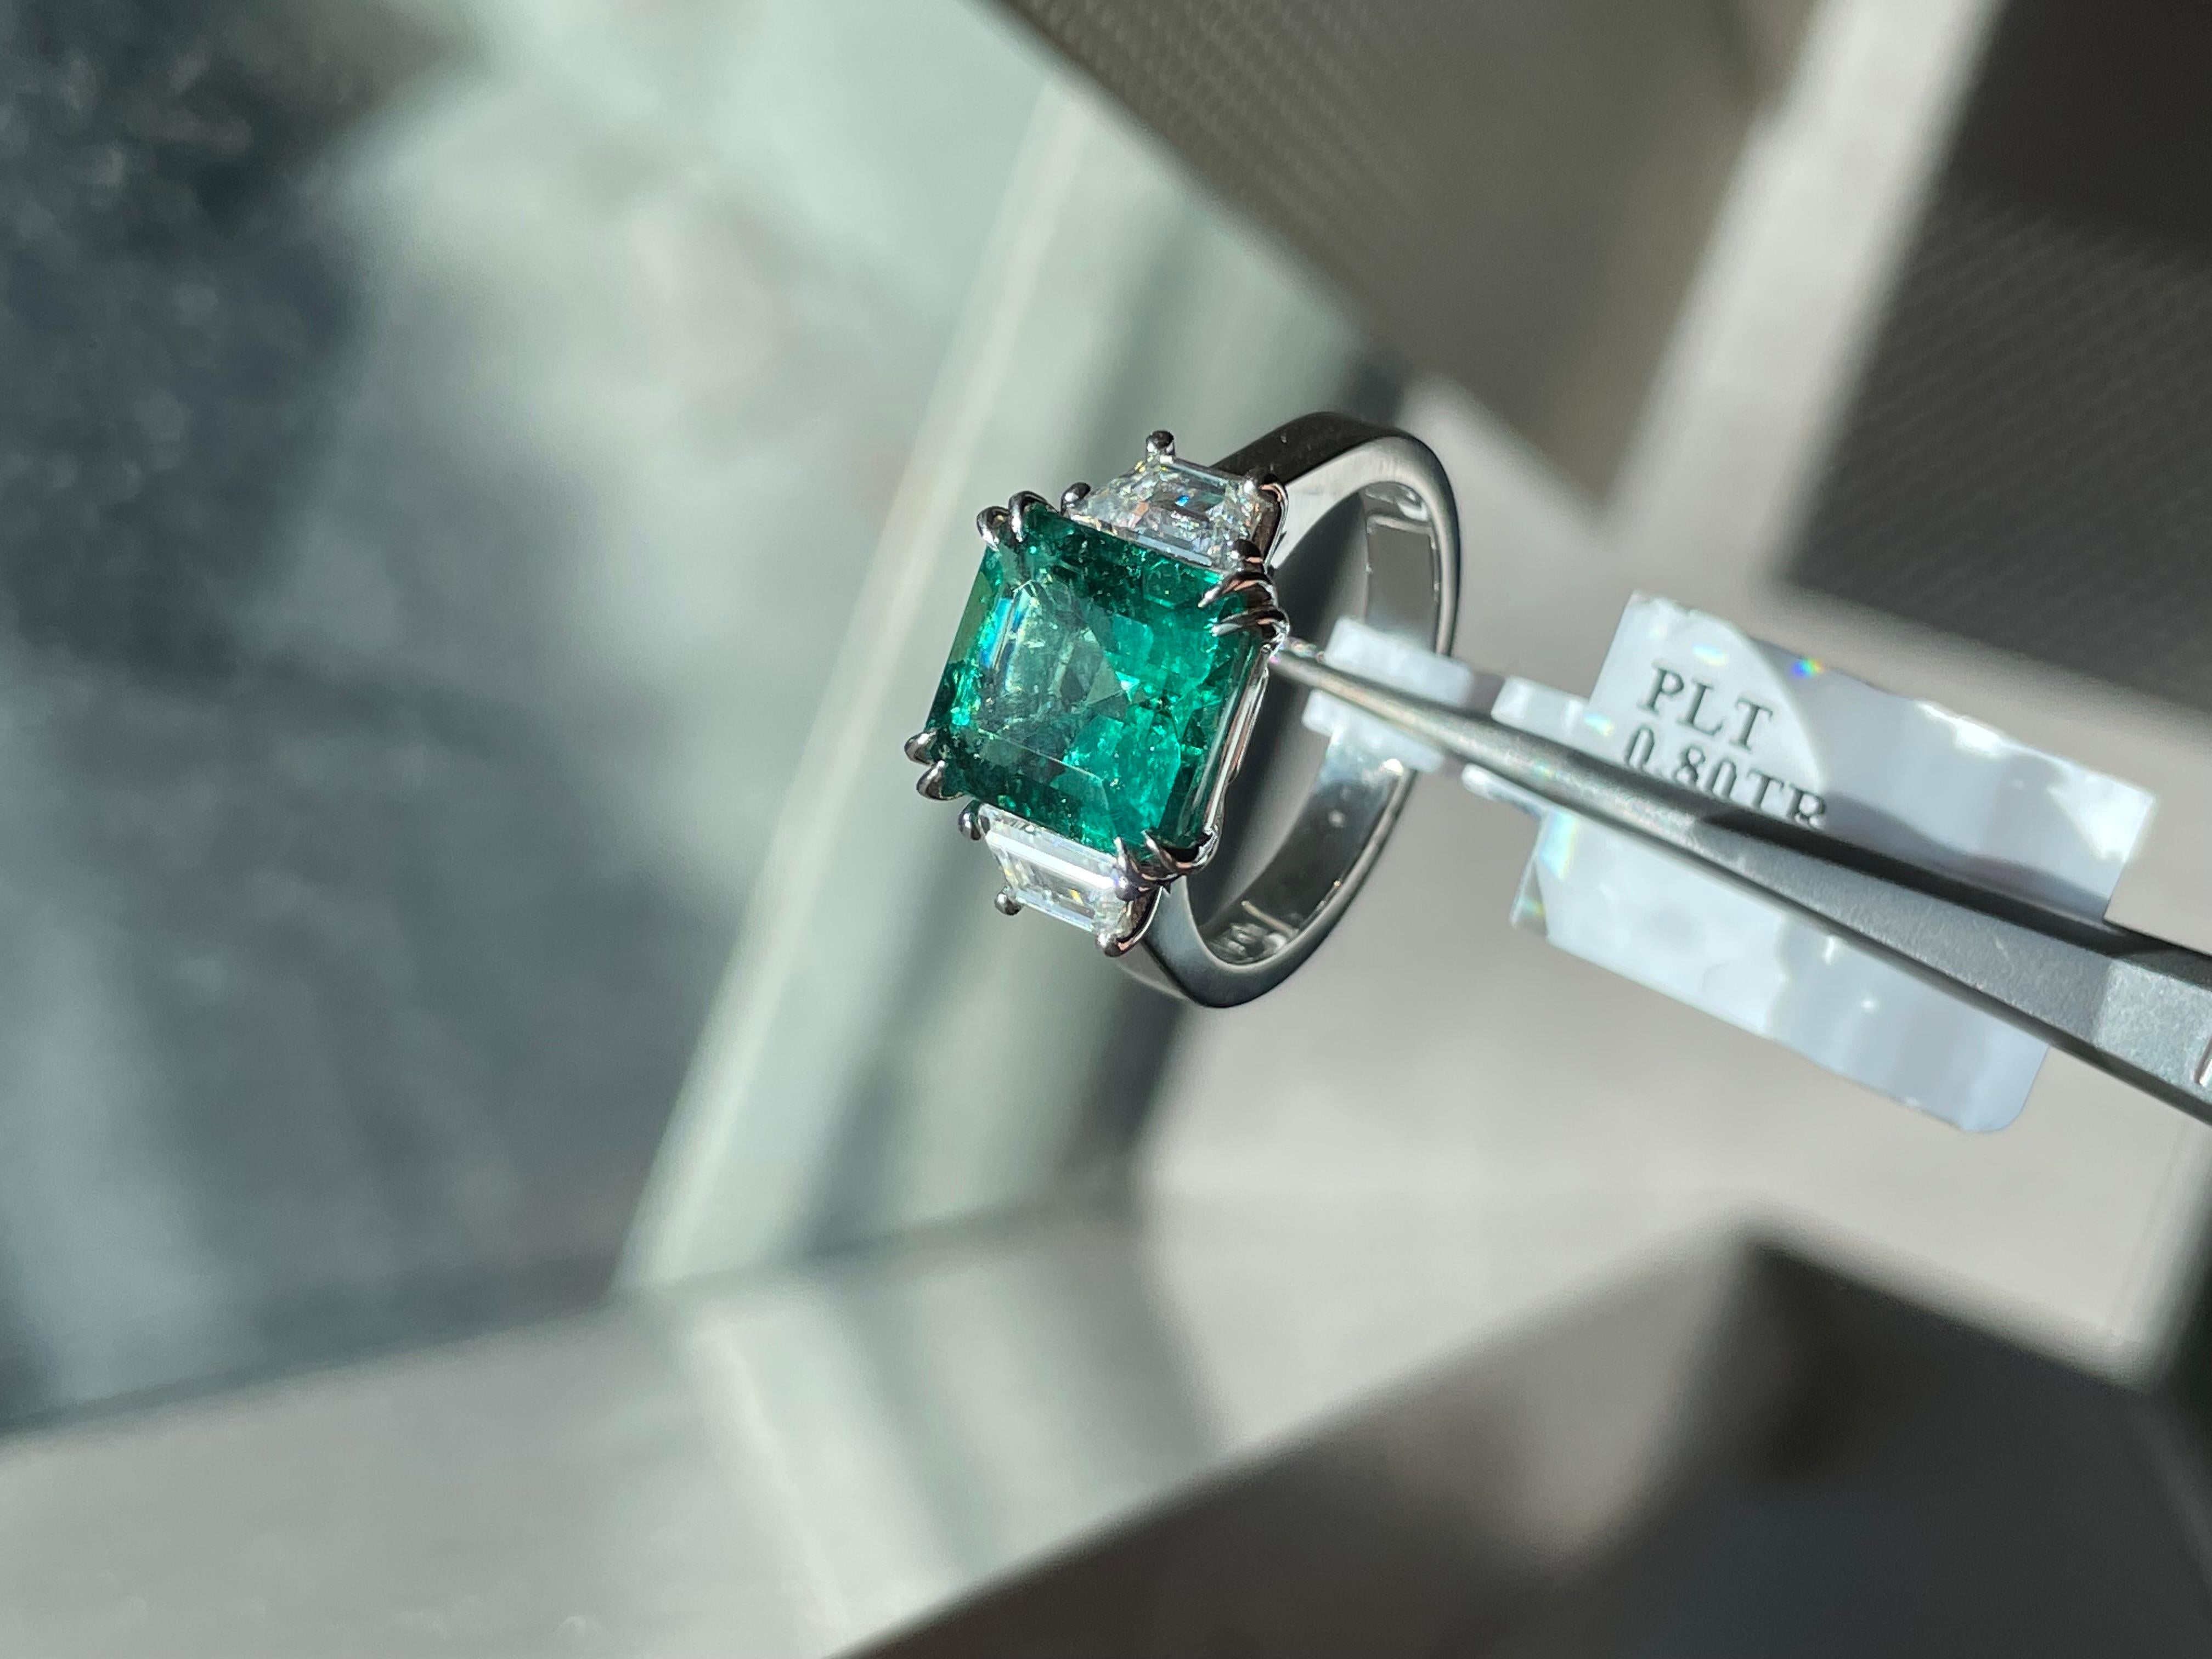 Spectacular Natural 3.87 Carat Emerald Radiant Cut 3 Stone Ring W/ Trapezoid Side Stones

Setting:
Platinum

Center Stone:
Natural 3.87ct Carat Emerald Radiant Cut
Origin: Zambian 

Side Stones: Natural Trapezoid Diamonds
Color: G-H
Clarity: VS
Cut: